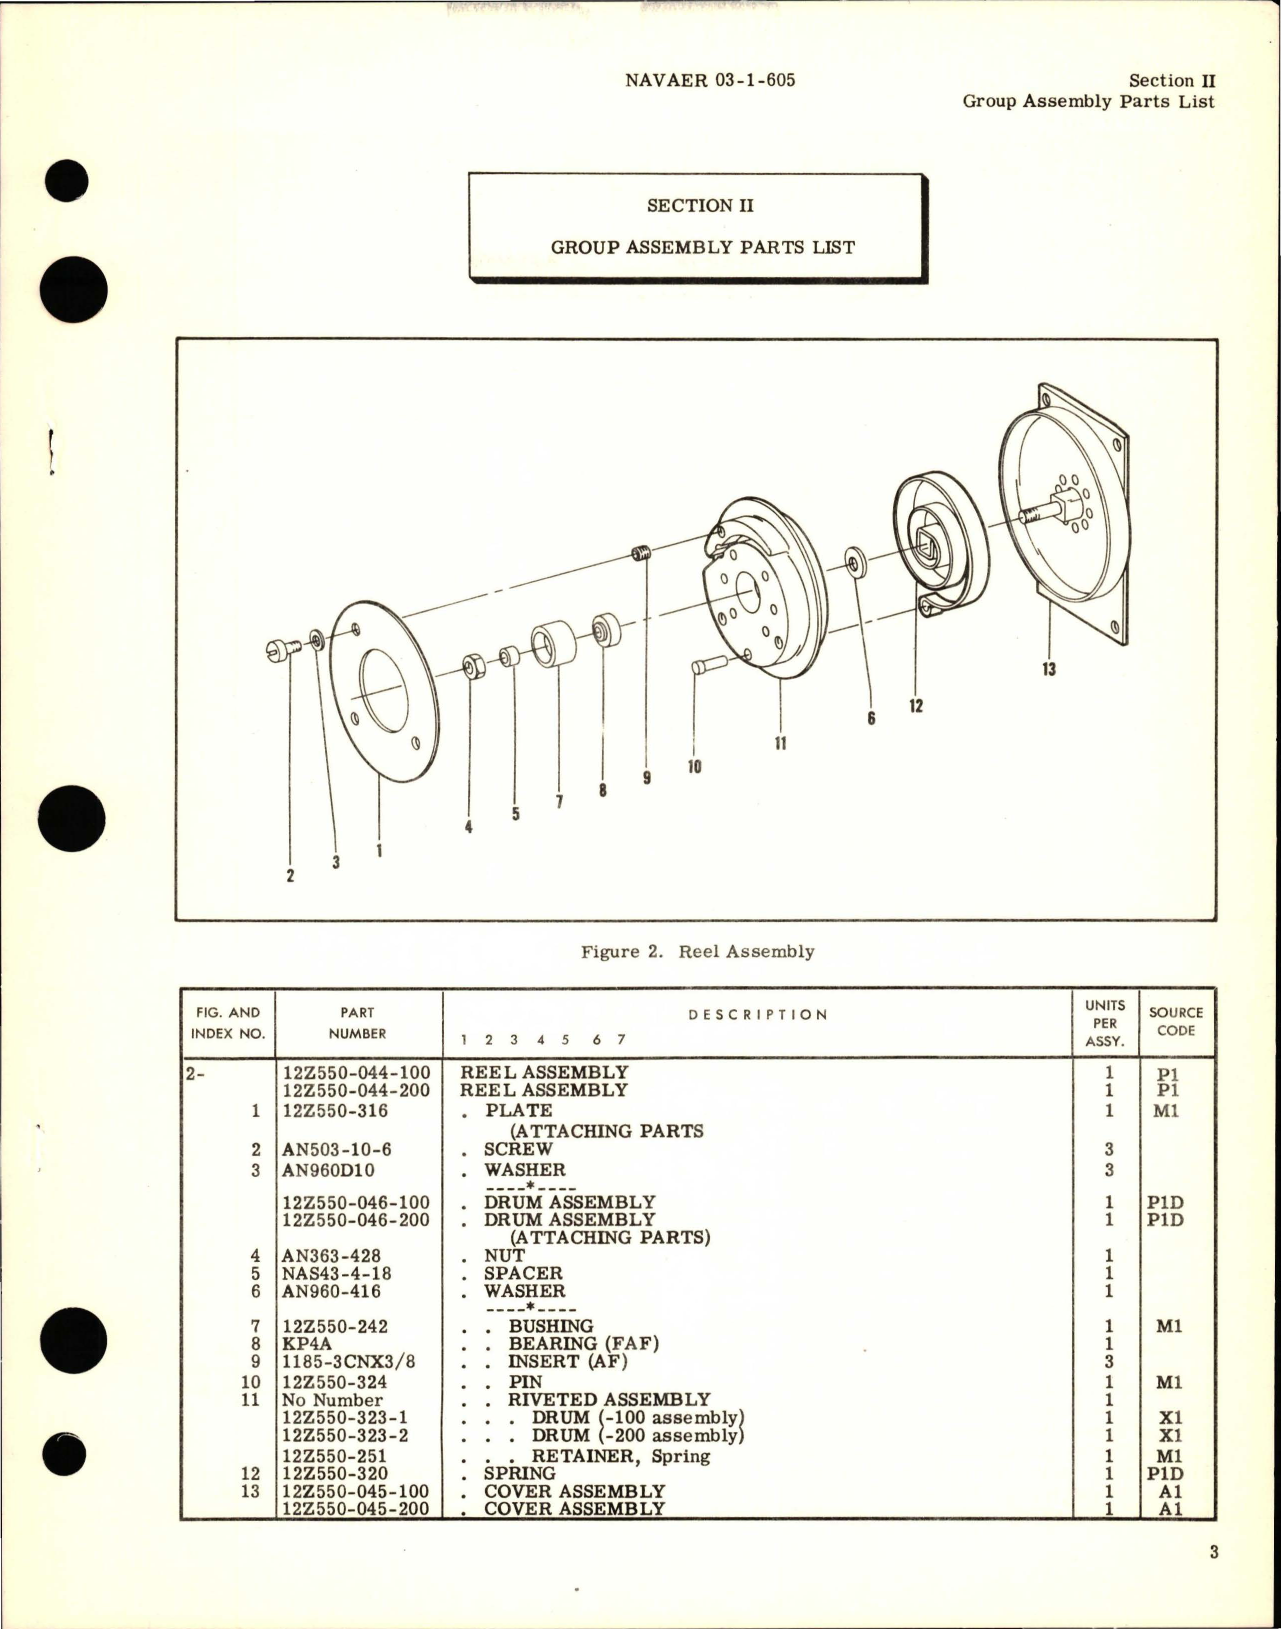 Sample page 5 from AirCorps Library document: Illustrated Parts Breakdown for Reel Assemblies - Parts 12Z550-044-100 and 12Z550-044-200